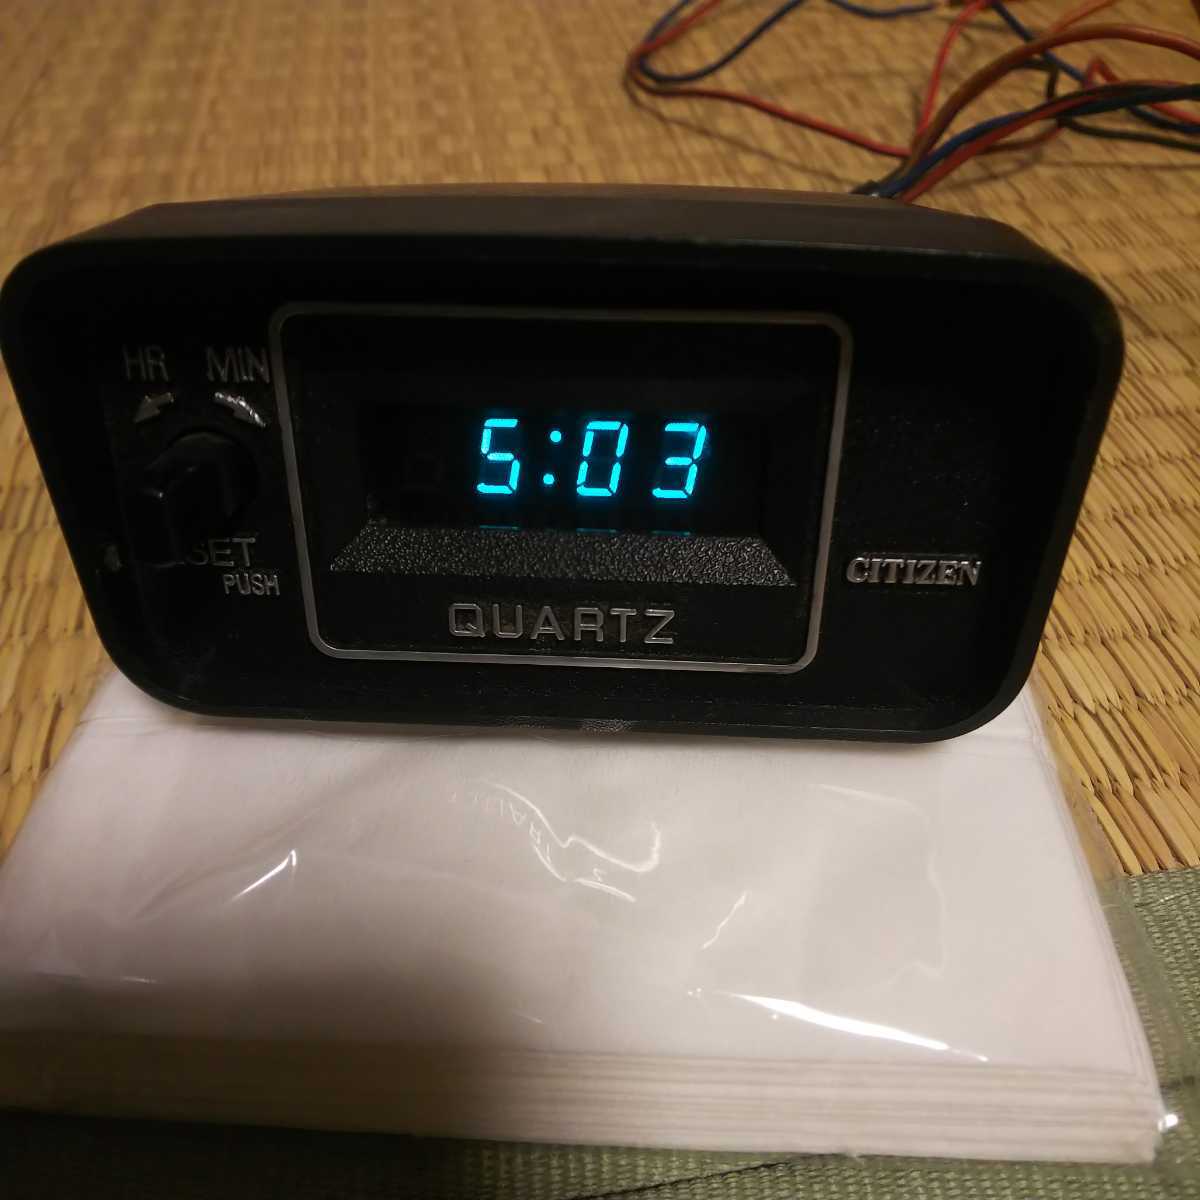  unusual? 80 period made it seems Citizen made. digital clock once actual work. 